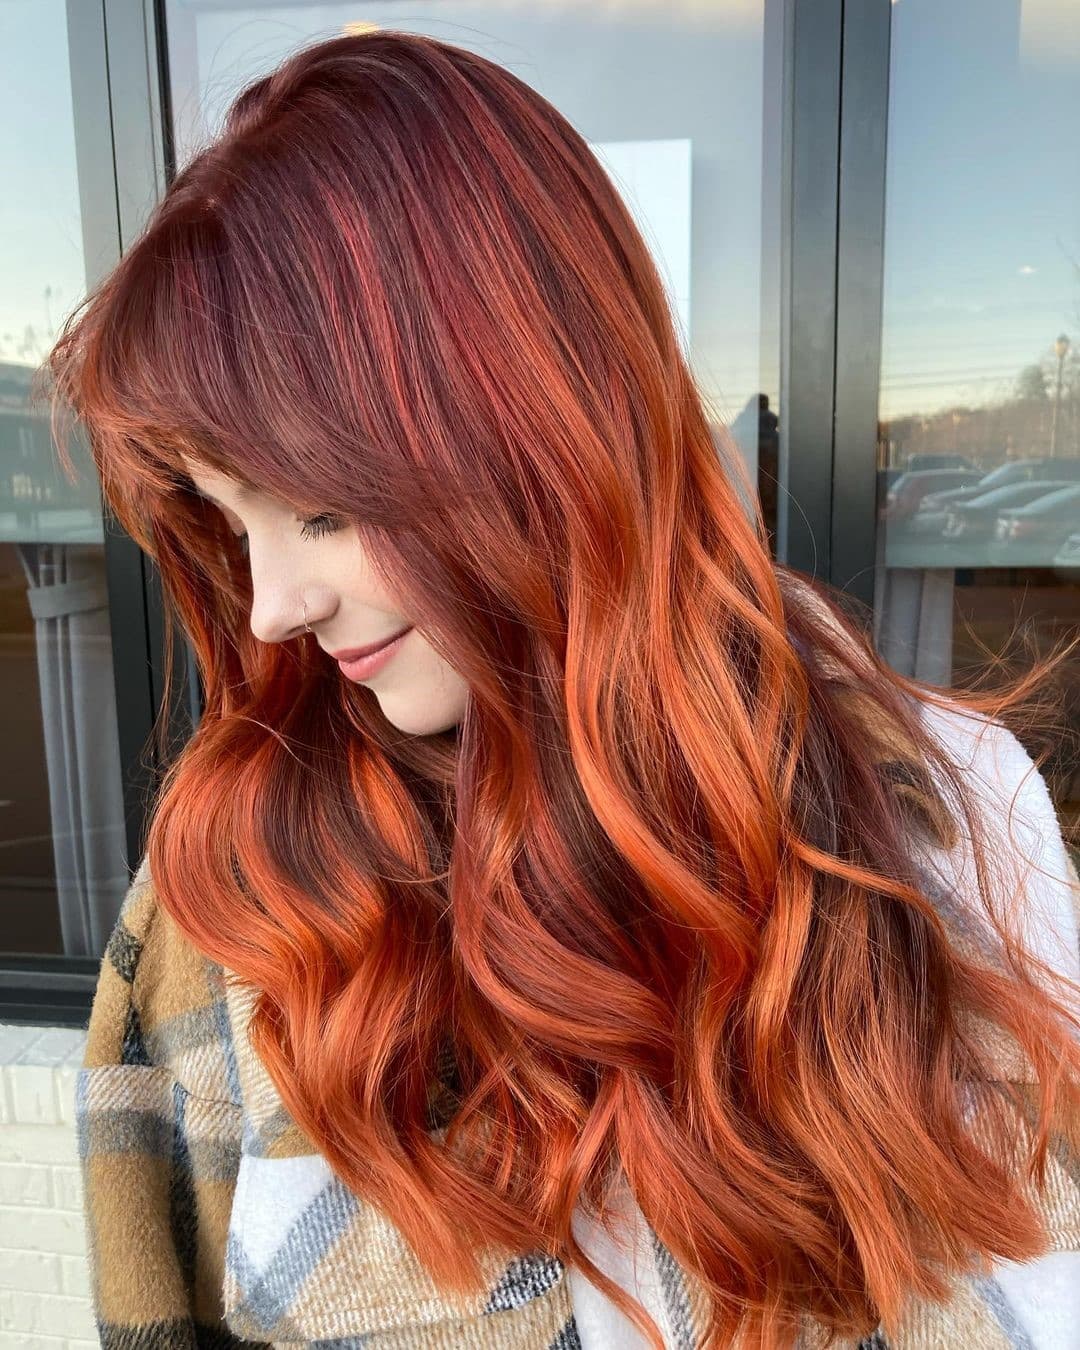 The Most Gorgeous Shades of Dark Red Hair Color to Try